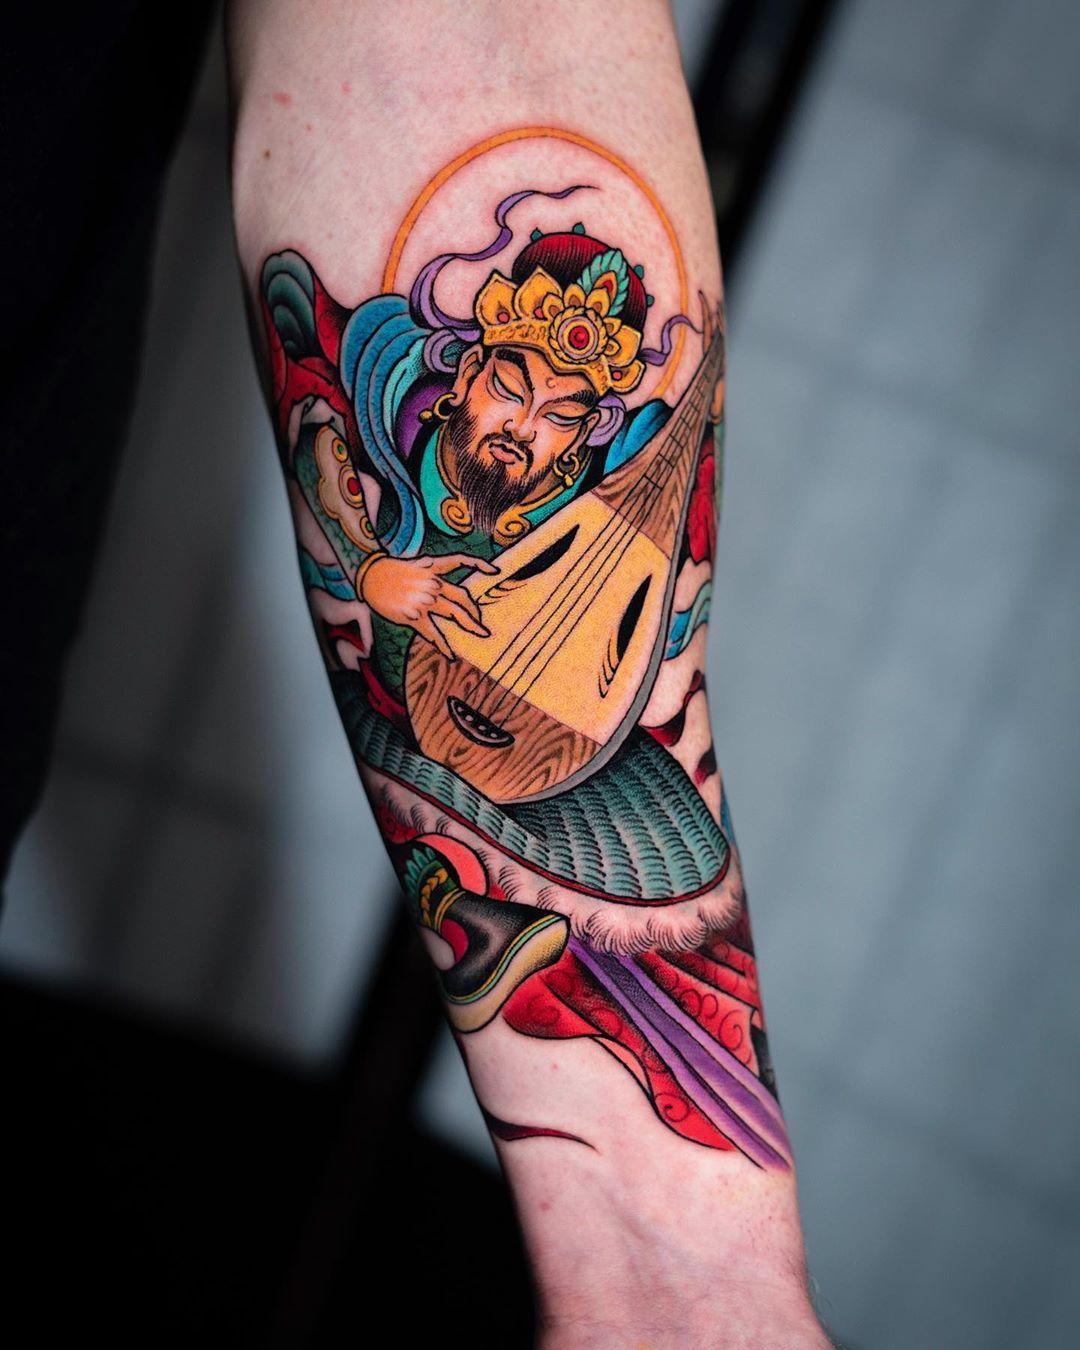 Guardians of eastin tattoo by @jin_qchoi